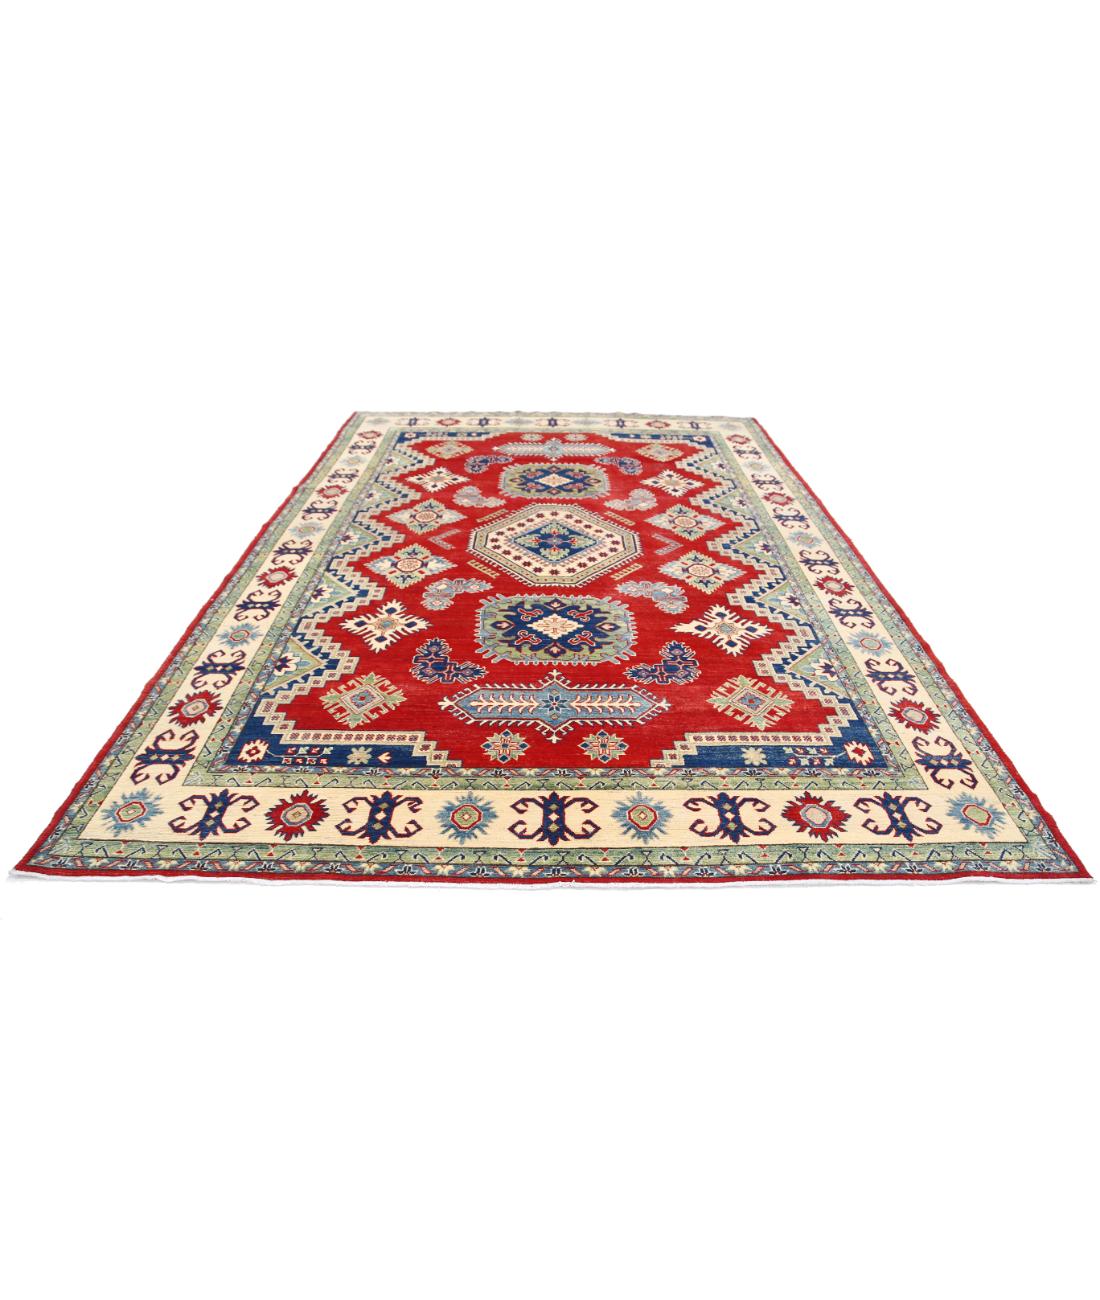 Hand Knotted Tribal Kazak Wool Rug - 8'6'' x 12'4'' 8' 6" X 12' 4" (259 X 376) / Red / Ivory